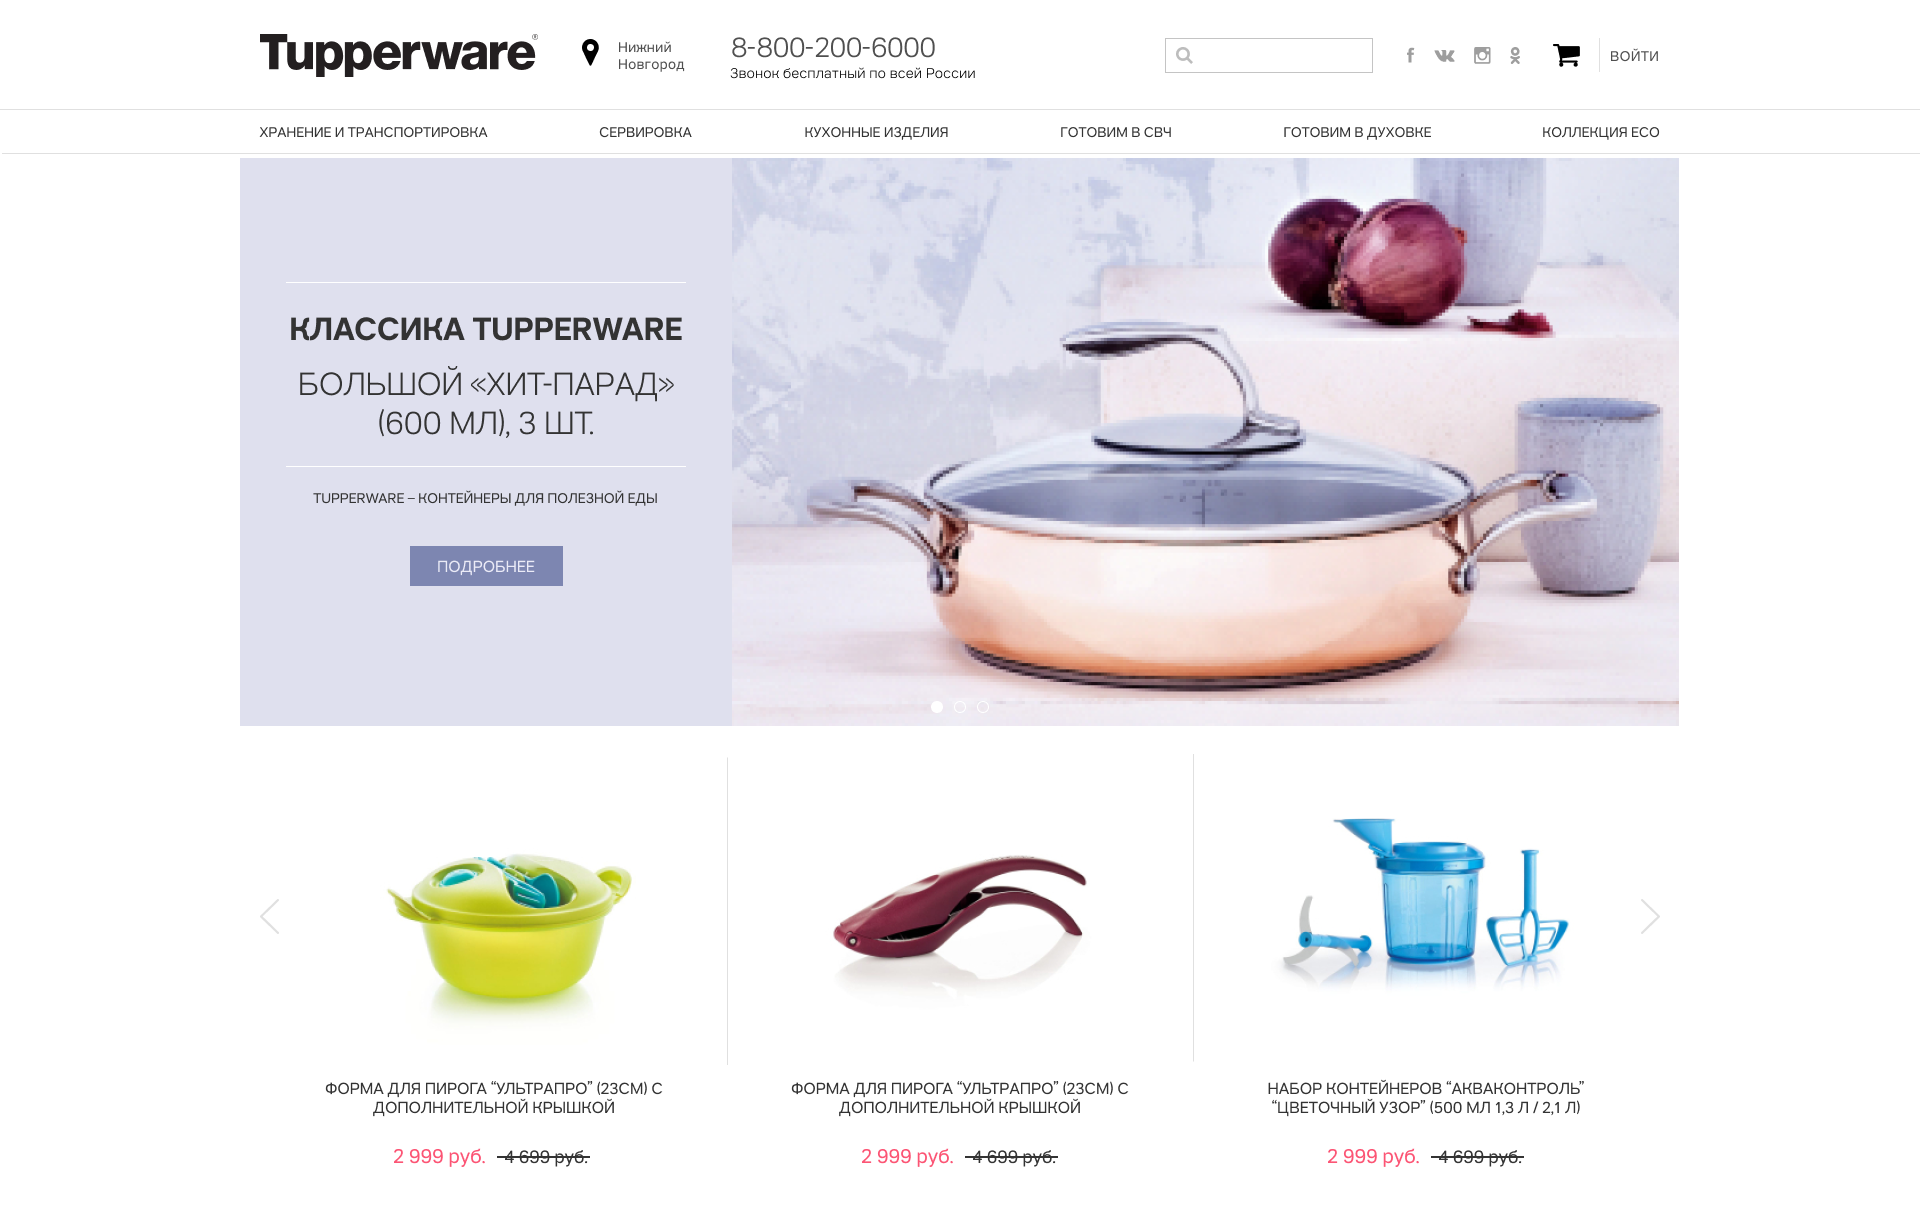 A part of Tupperware website design showing the first few elements of the home page